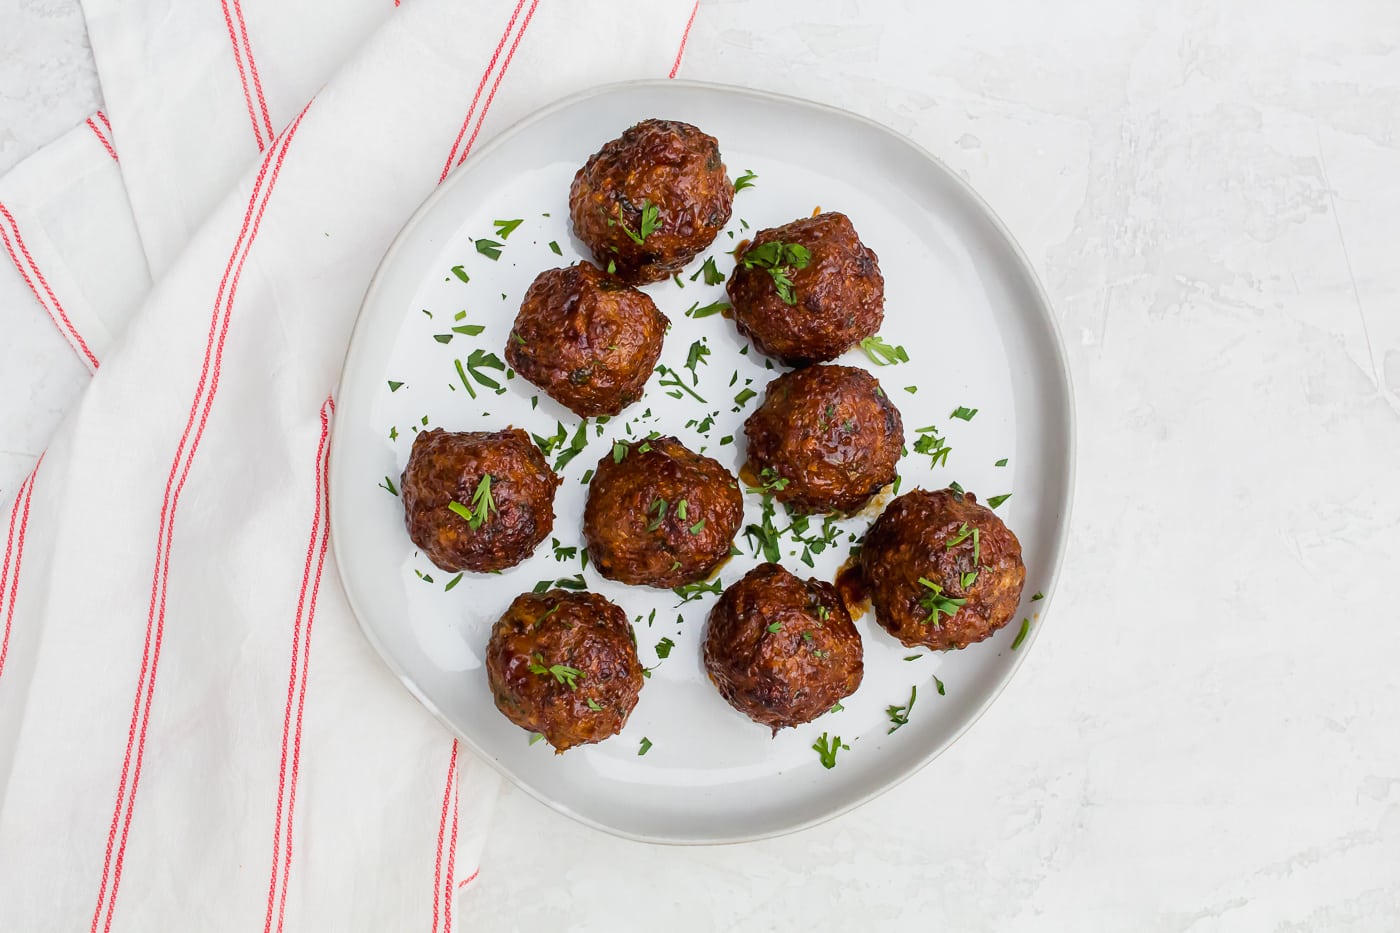 meatballs on a white plate sprinkled with chopped green pieces of parsley